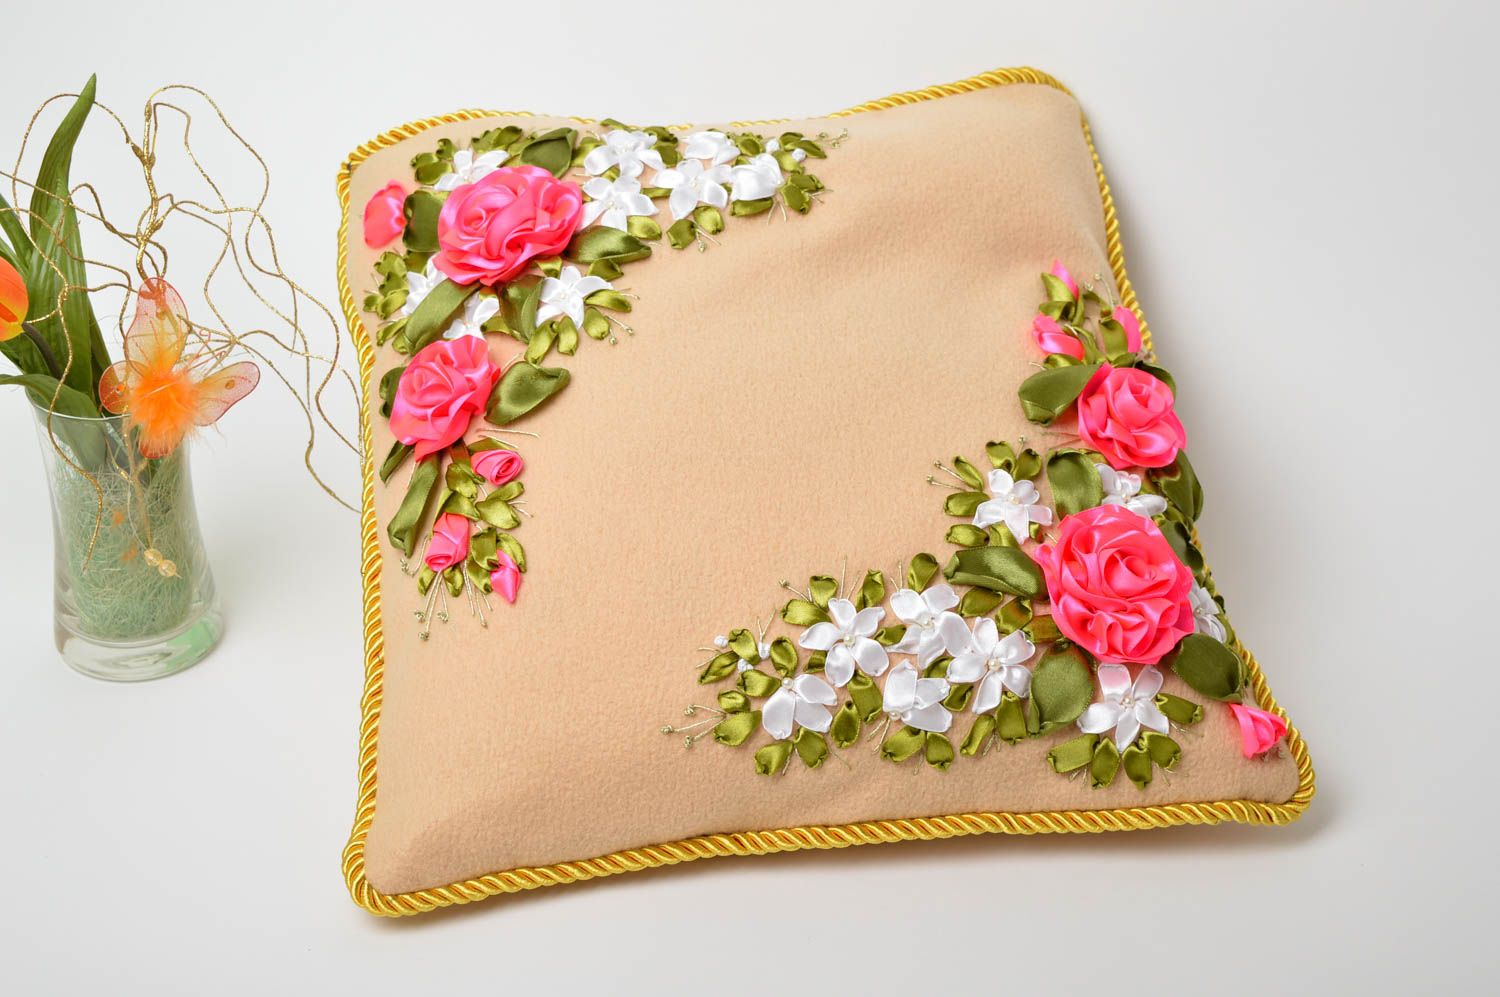 Handmade pillowcase decorative flower pillowcase cool rooms decorative use only photo 1